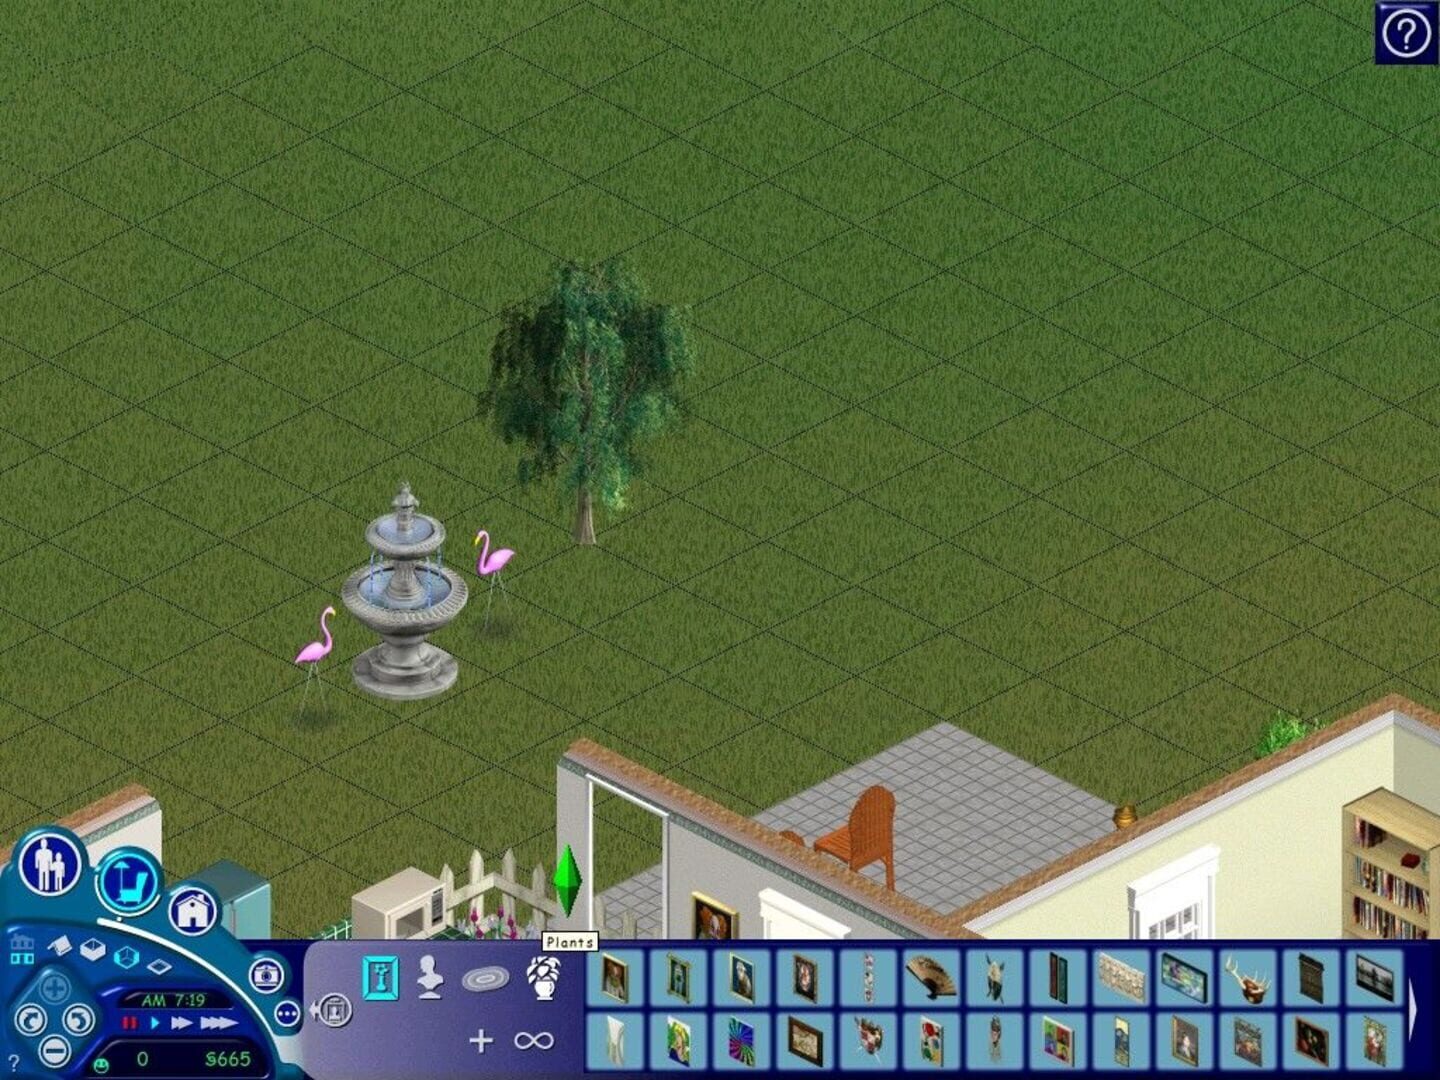 Sims 1 18. Симс 3 complete collection. The SIMS 1 антология. The SIMS 1 complete collection. Симс 1 геймплей.